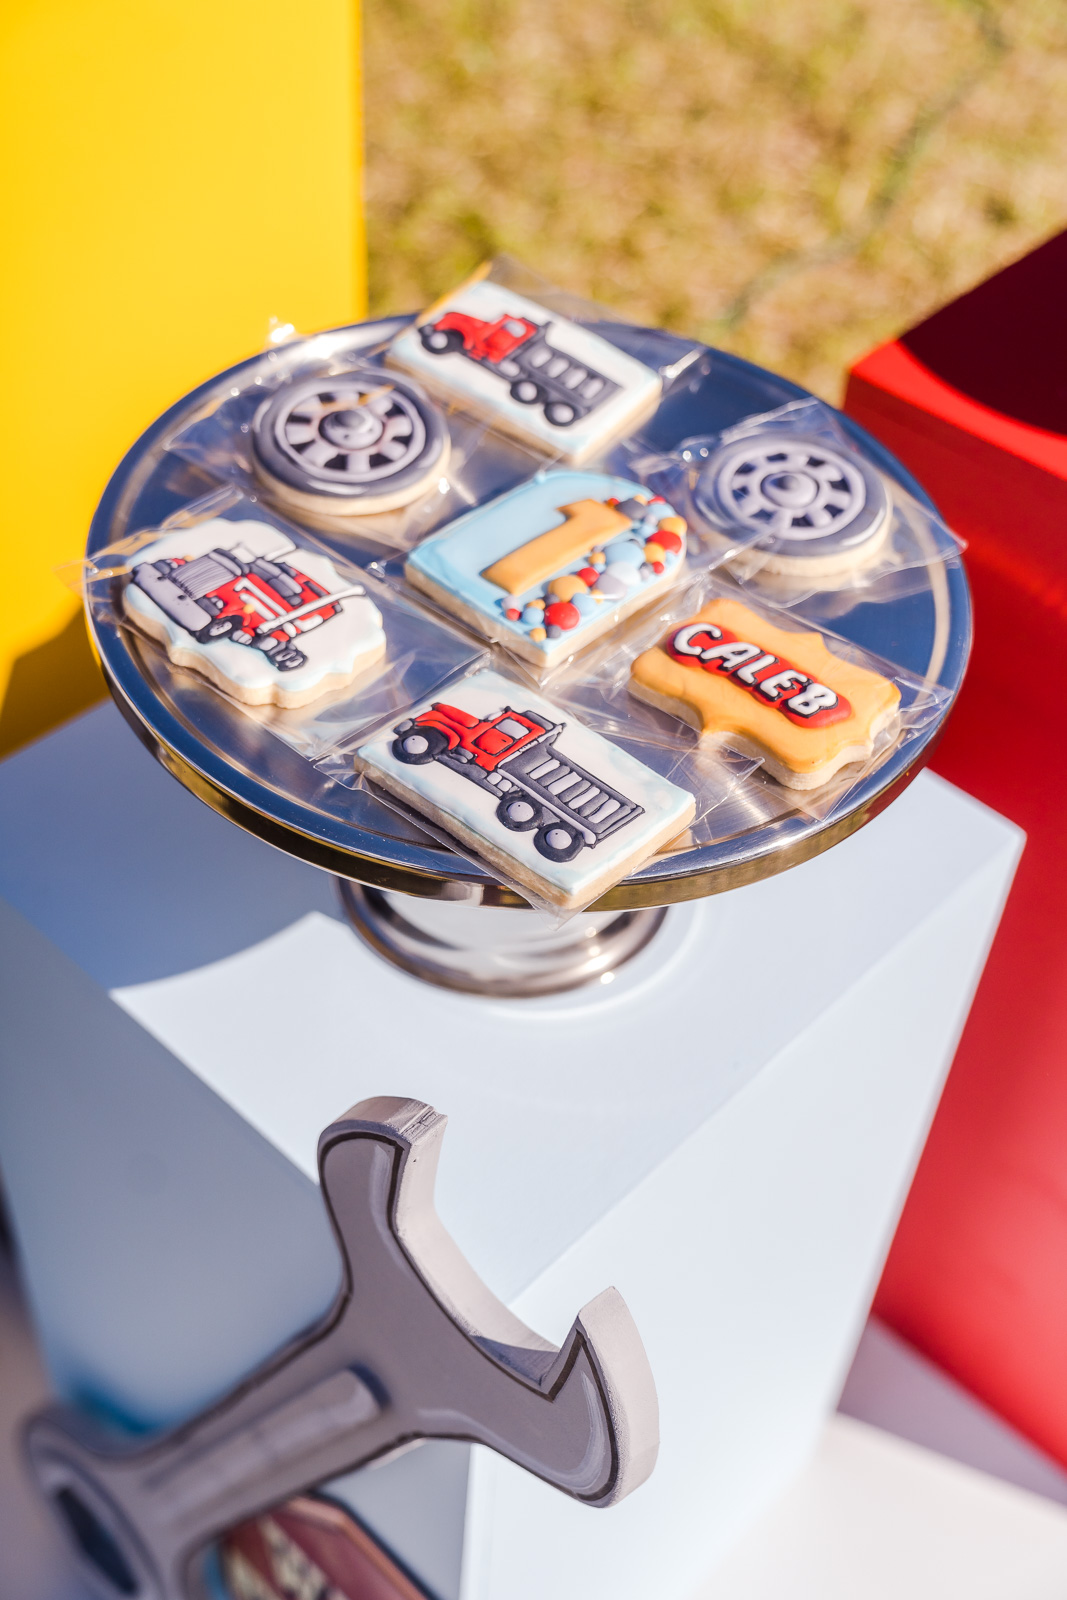 Truck stop themed cookies tool wrench decorations for birthday party in Orlando Florida